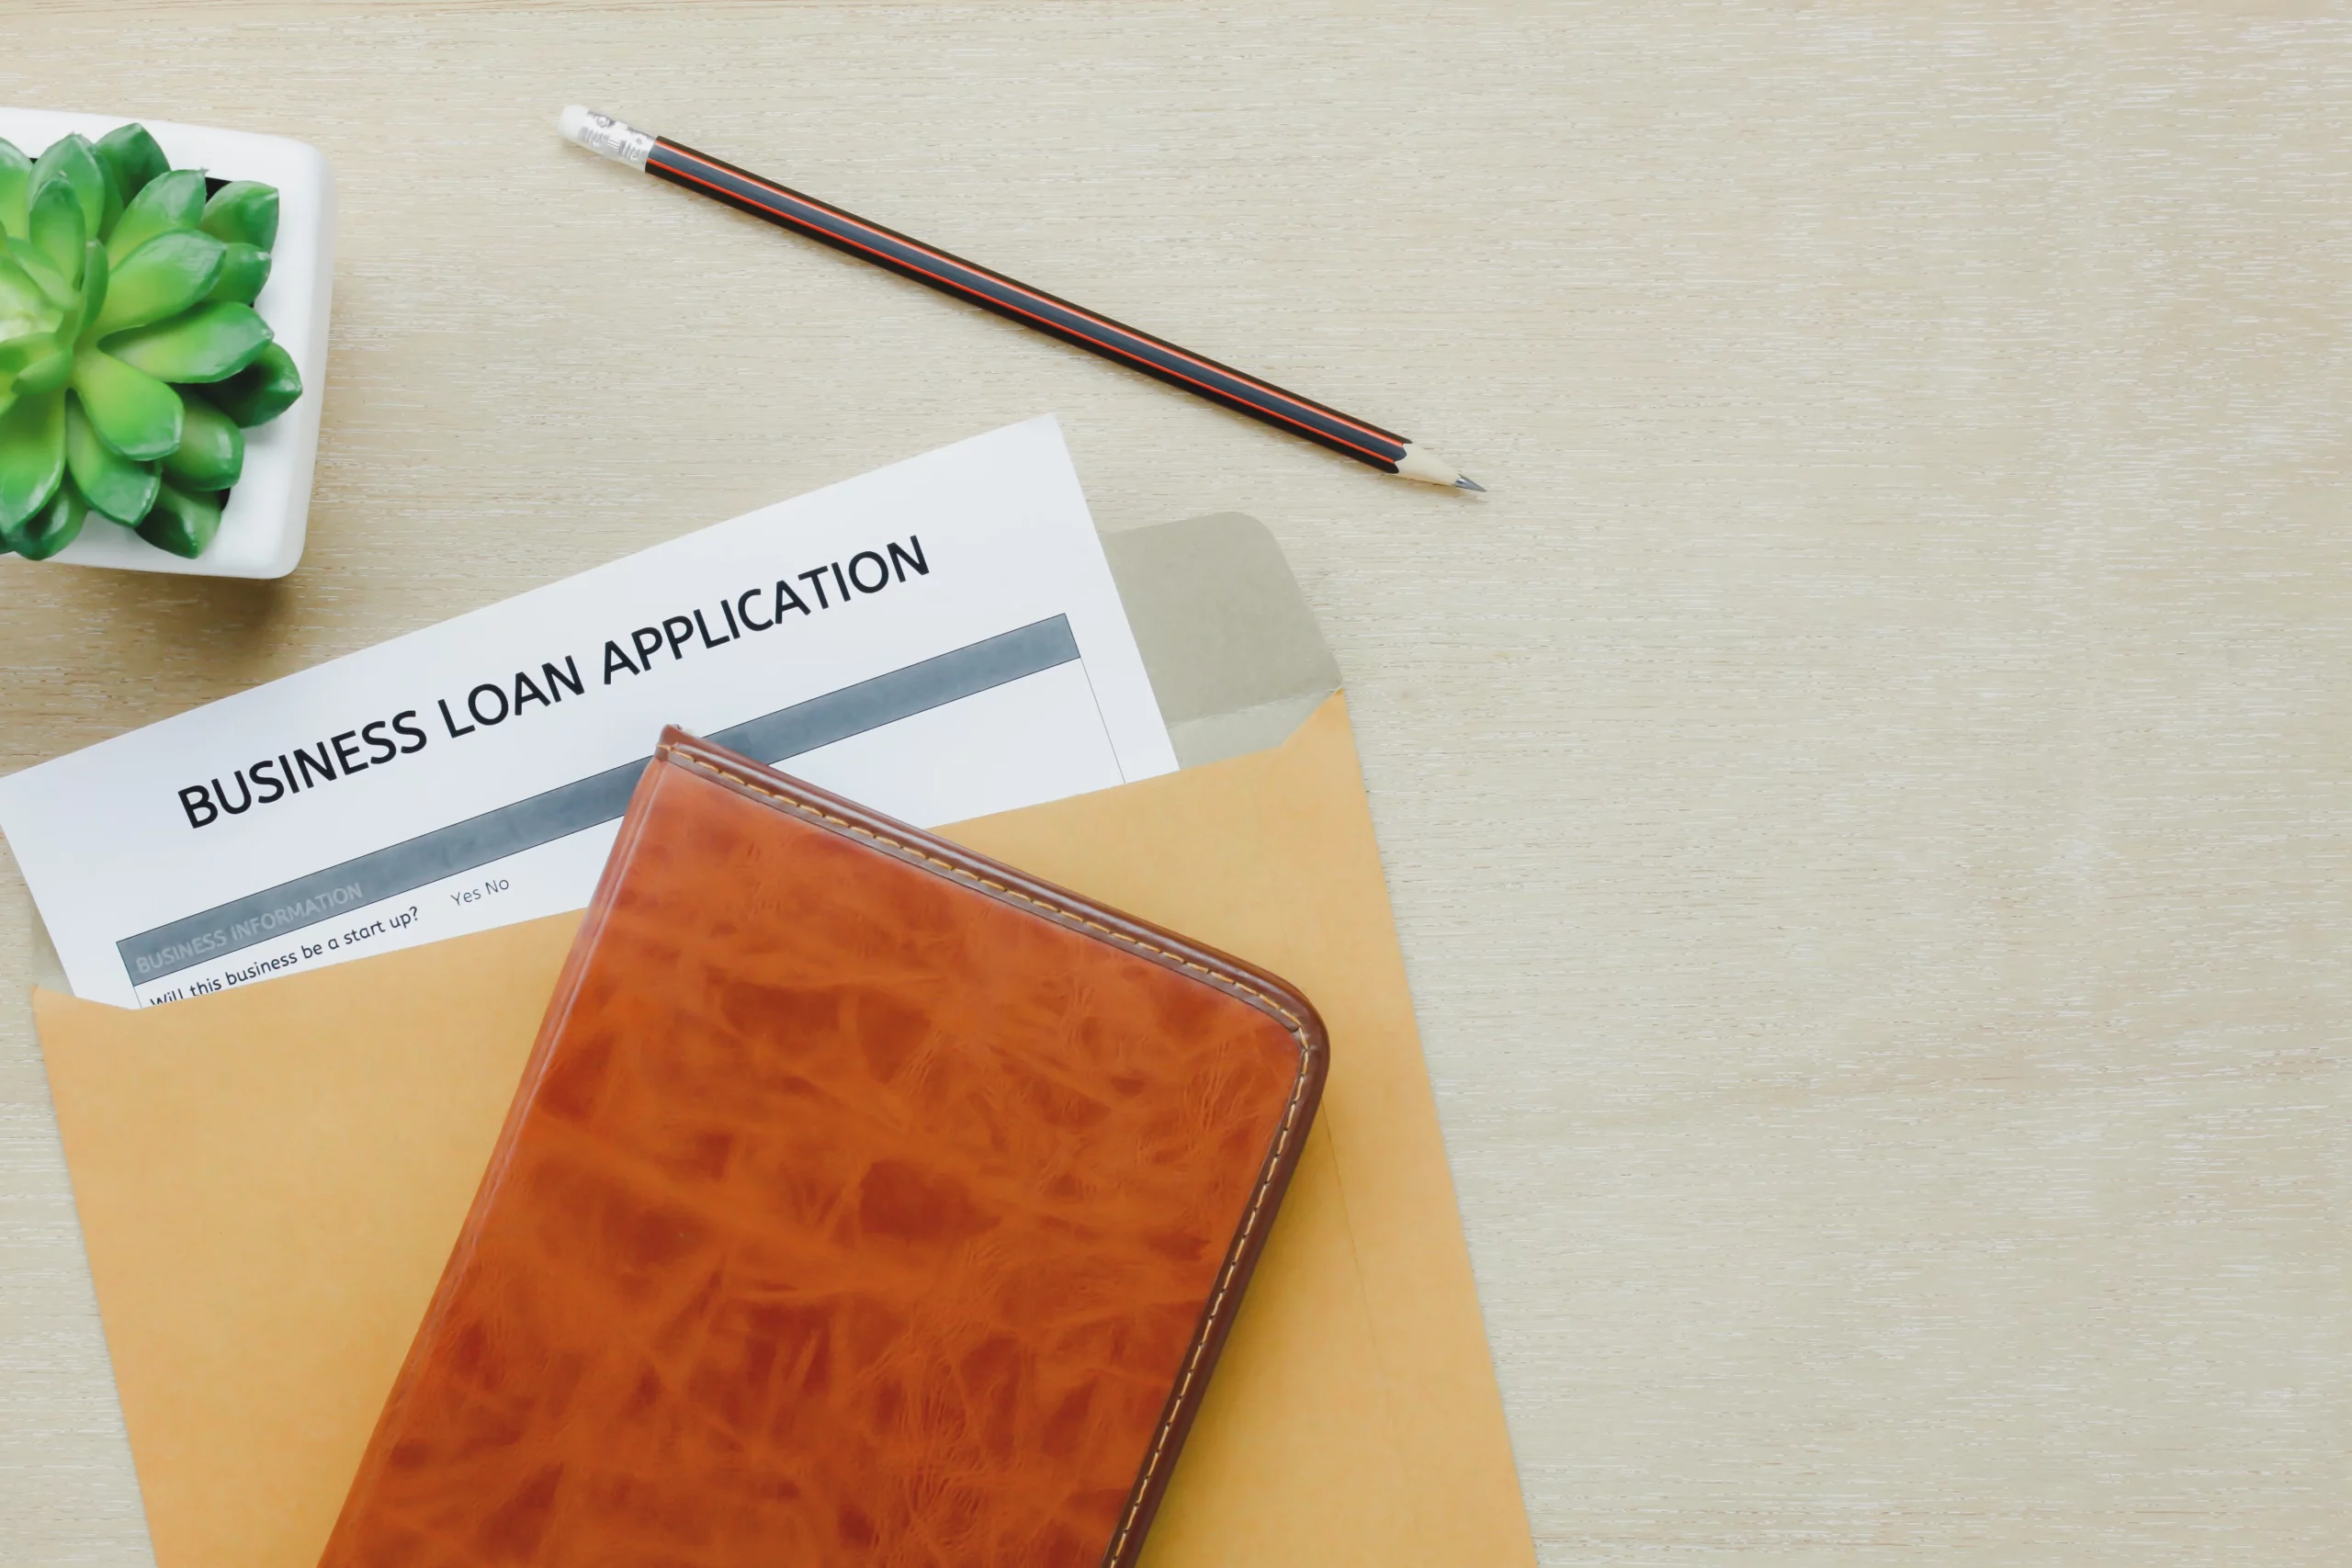 Do’s and Don’ts of Business Loan